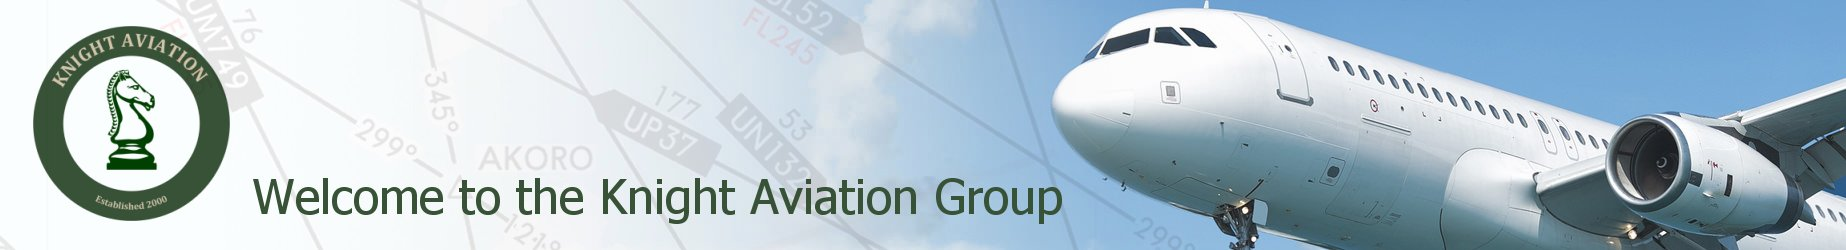 Welcome to the Knight Aviation Group